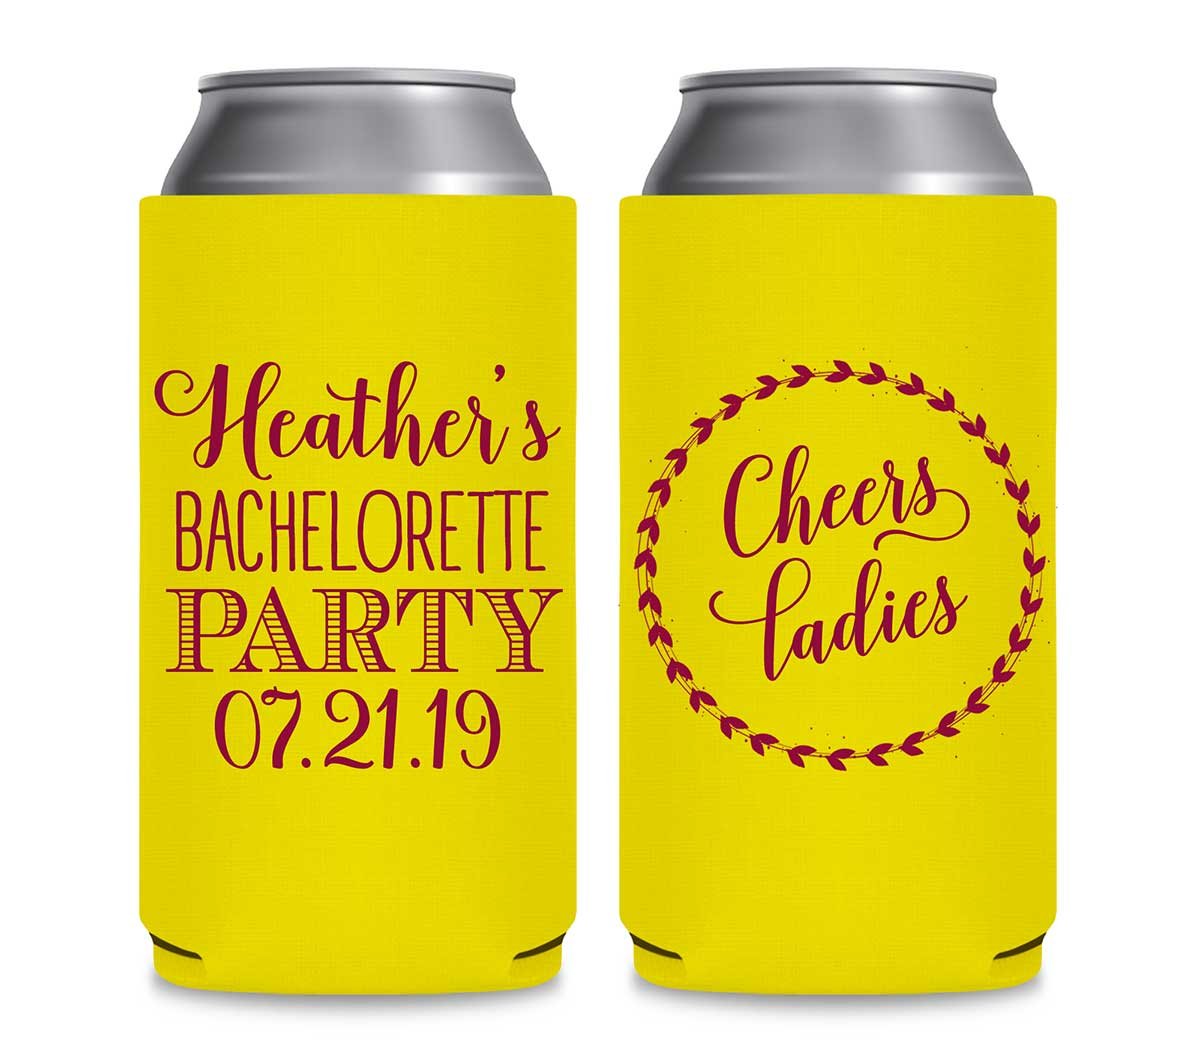 Cheers Ladies Bachelorette 1A Foldable 12 oz Slim Can Koozies Wedding Gifts for Guests